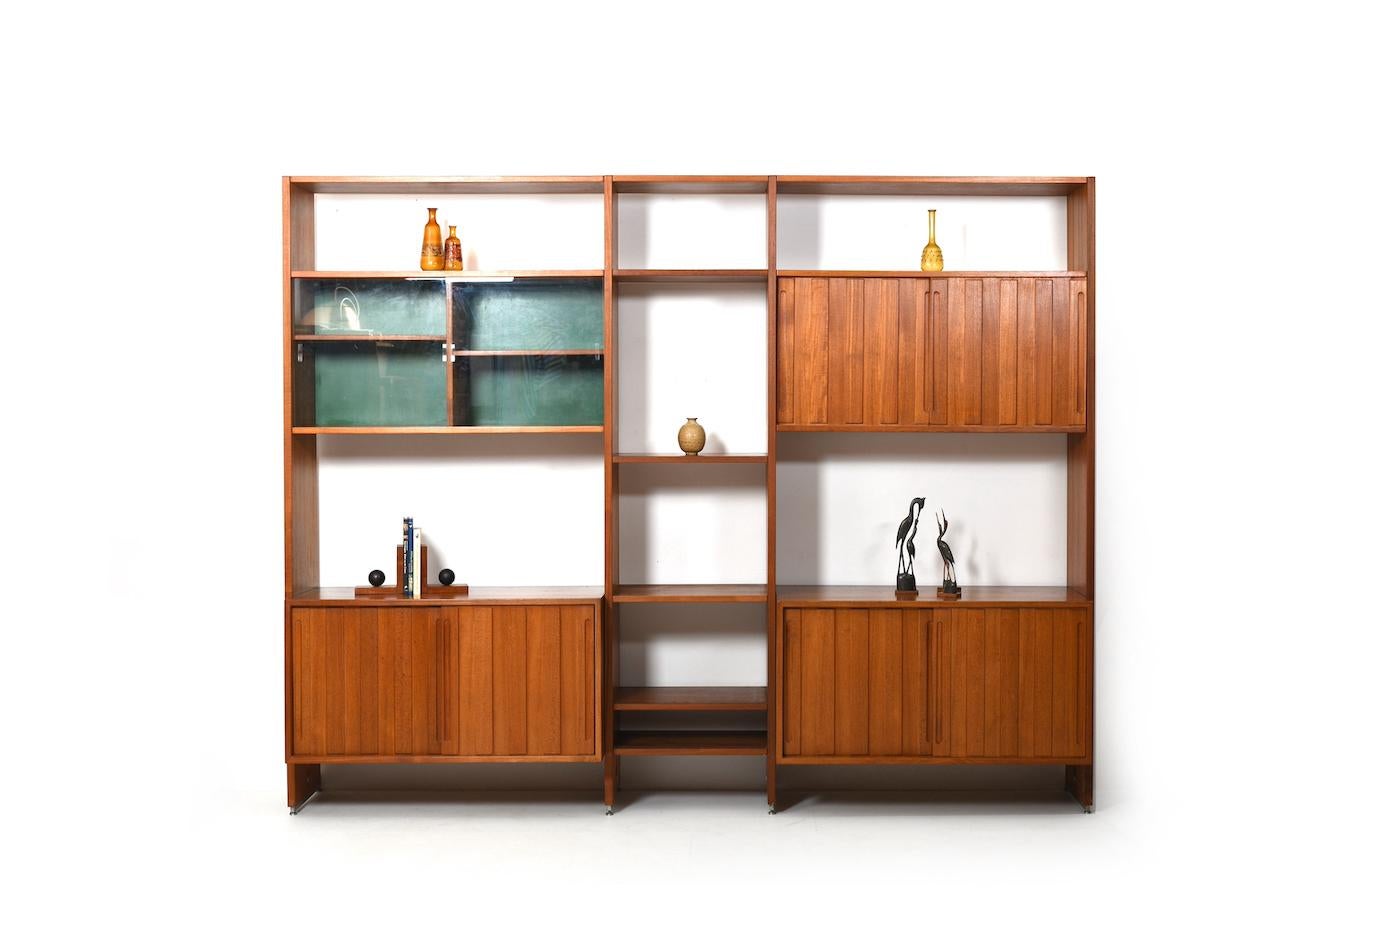 Danish wall unit in teak. Designed by Hans J.Wegner, manufactured by Ry Møbler. Mod. RY100 Denmark, 1960s.
The wall system consists of 4 cabinets (inside with shelves, one with glass doors) and a smaller middle part with just shelves (5 pcs.).